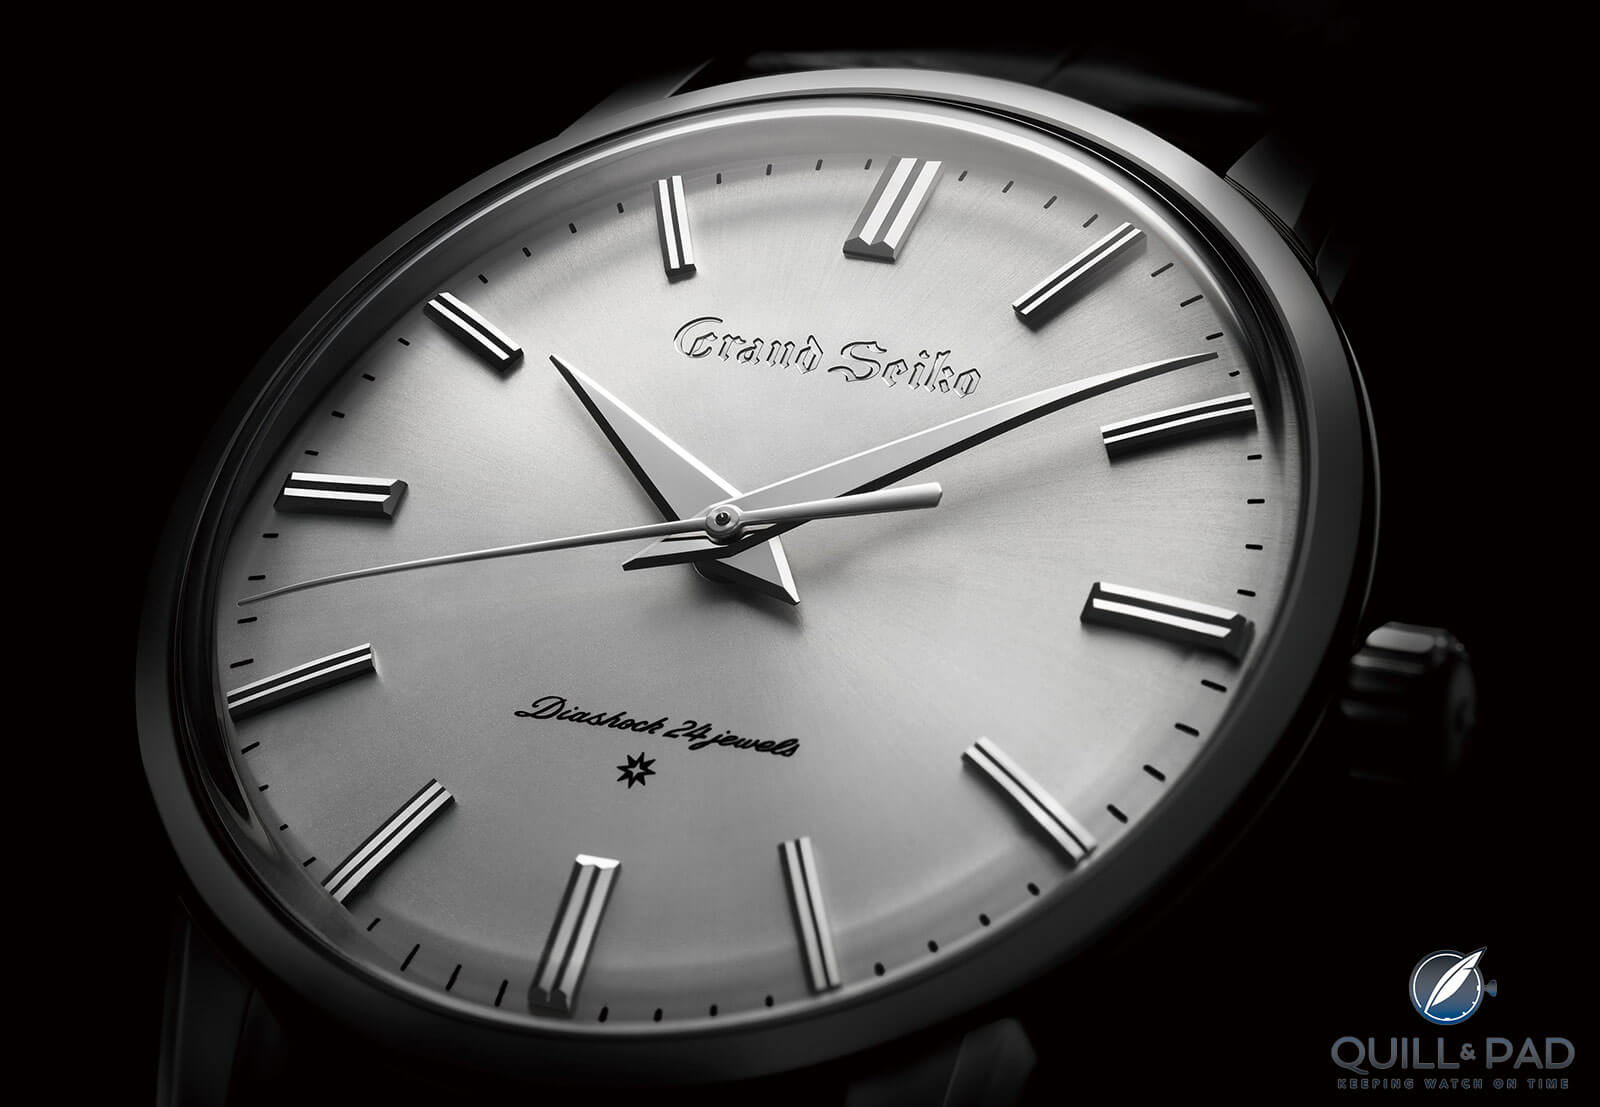 Grand Seiko 1960 Re-Creations: Celebrating A Turning Point - Quill & Pad